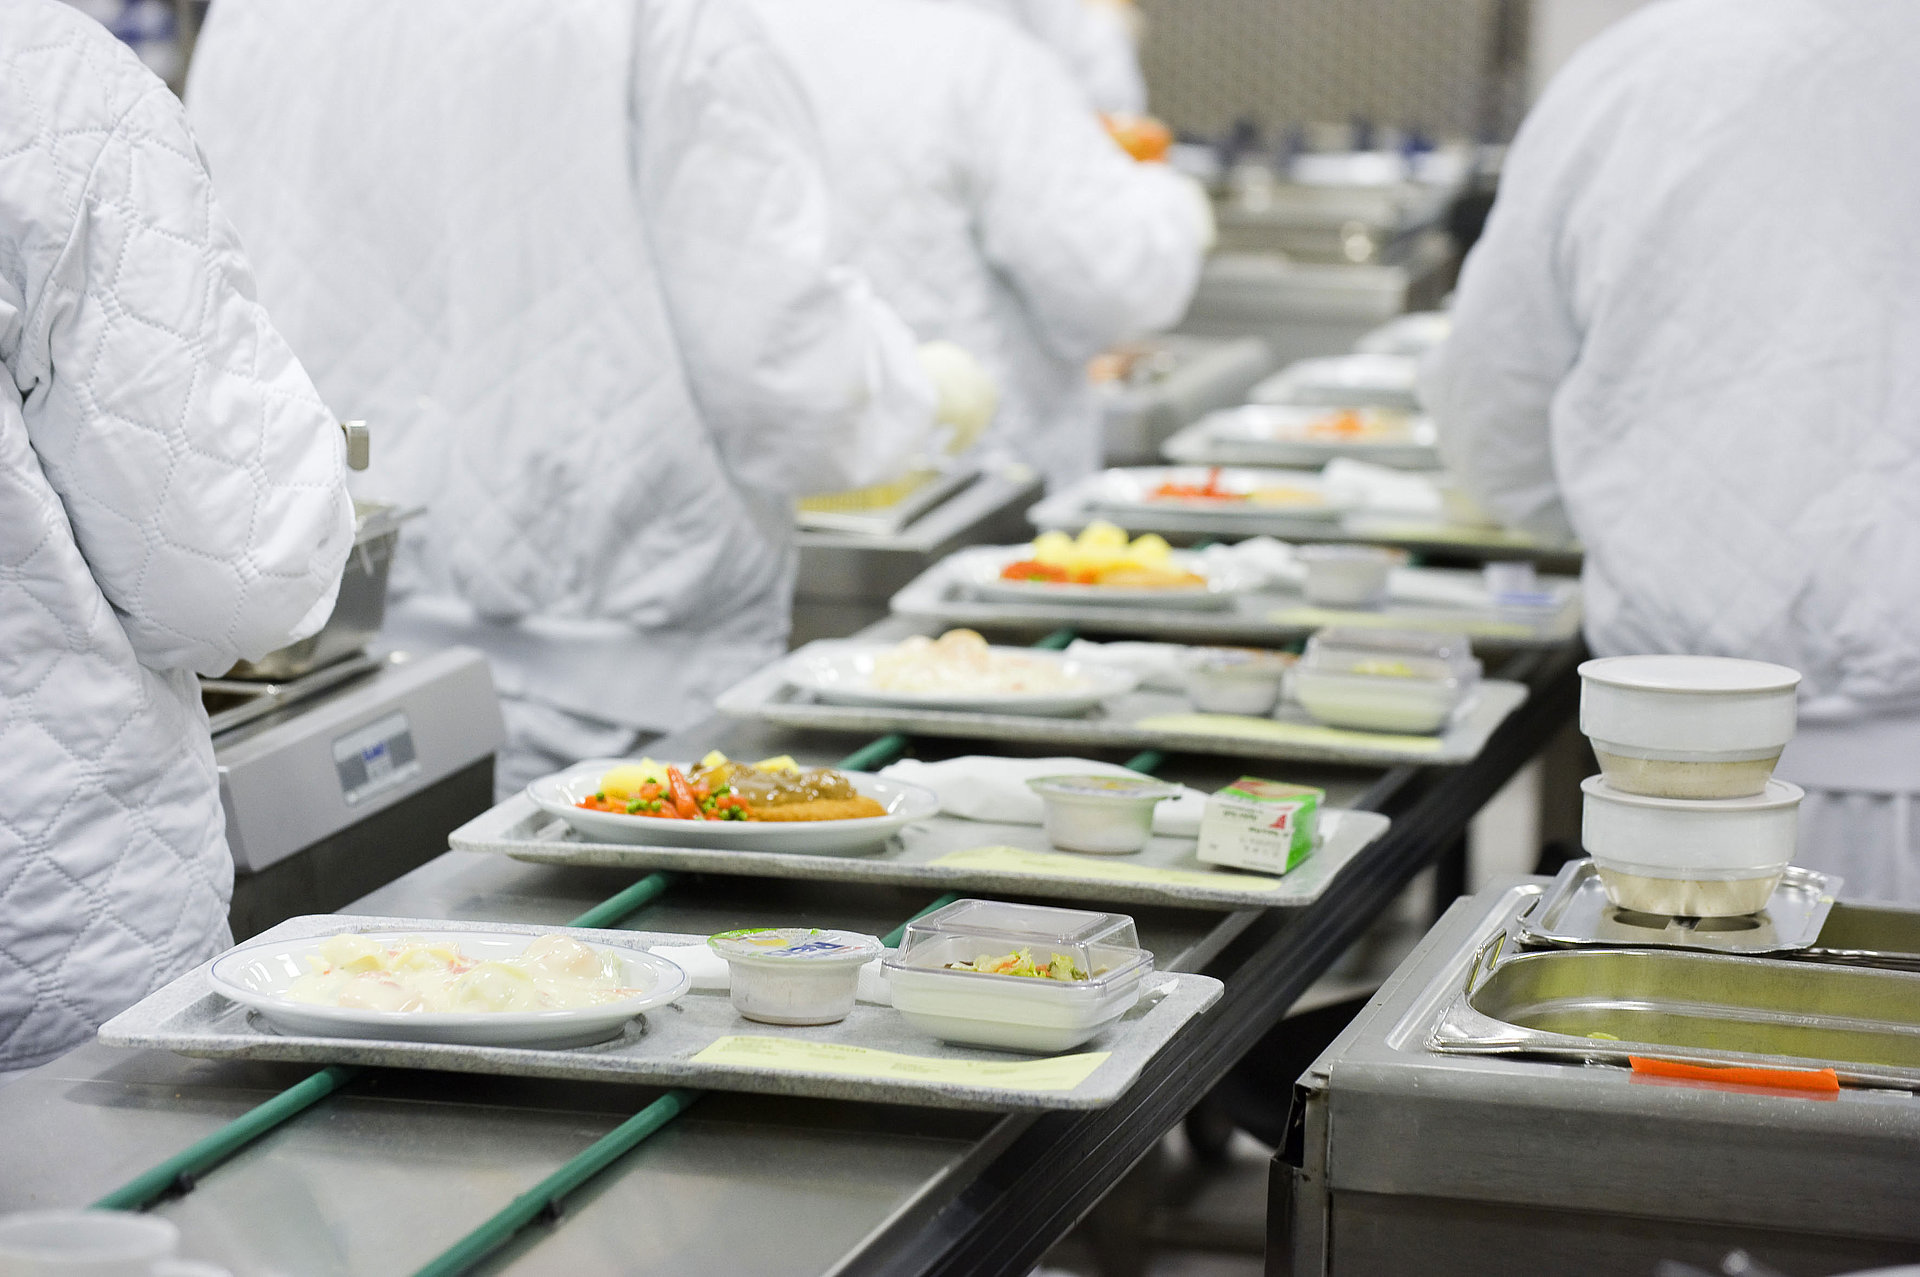 Meals for aircraft on trays are transported on a conveyor belt